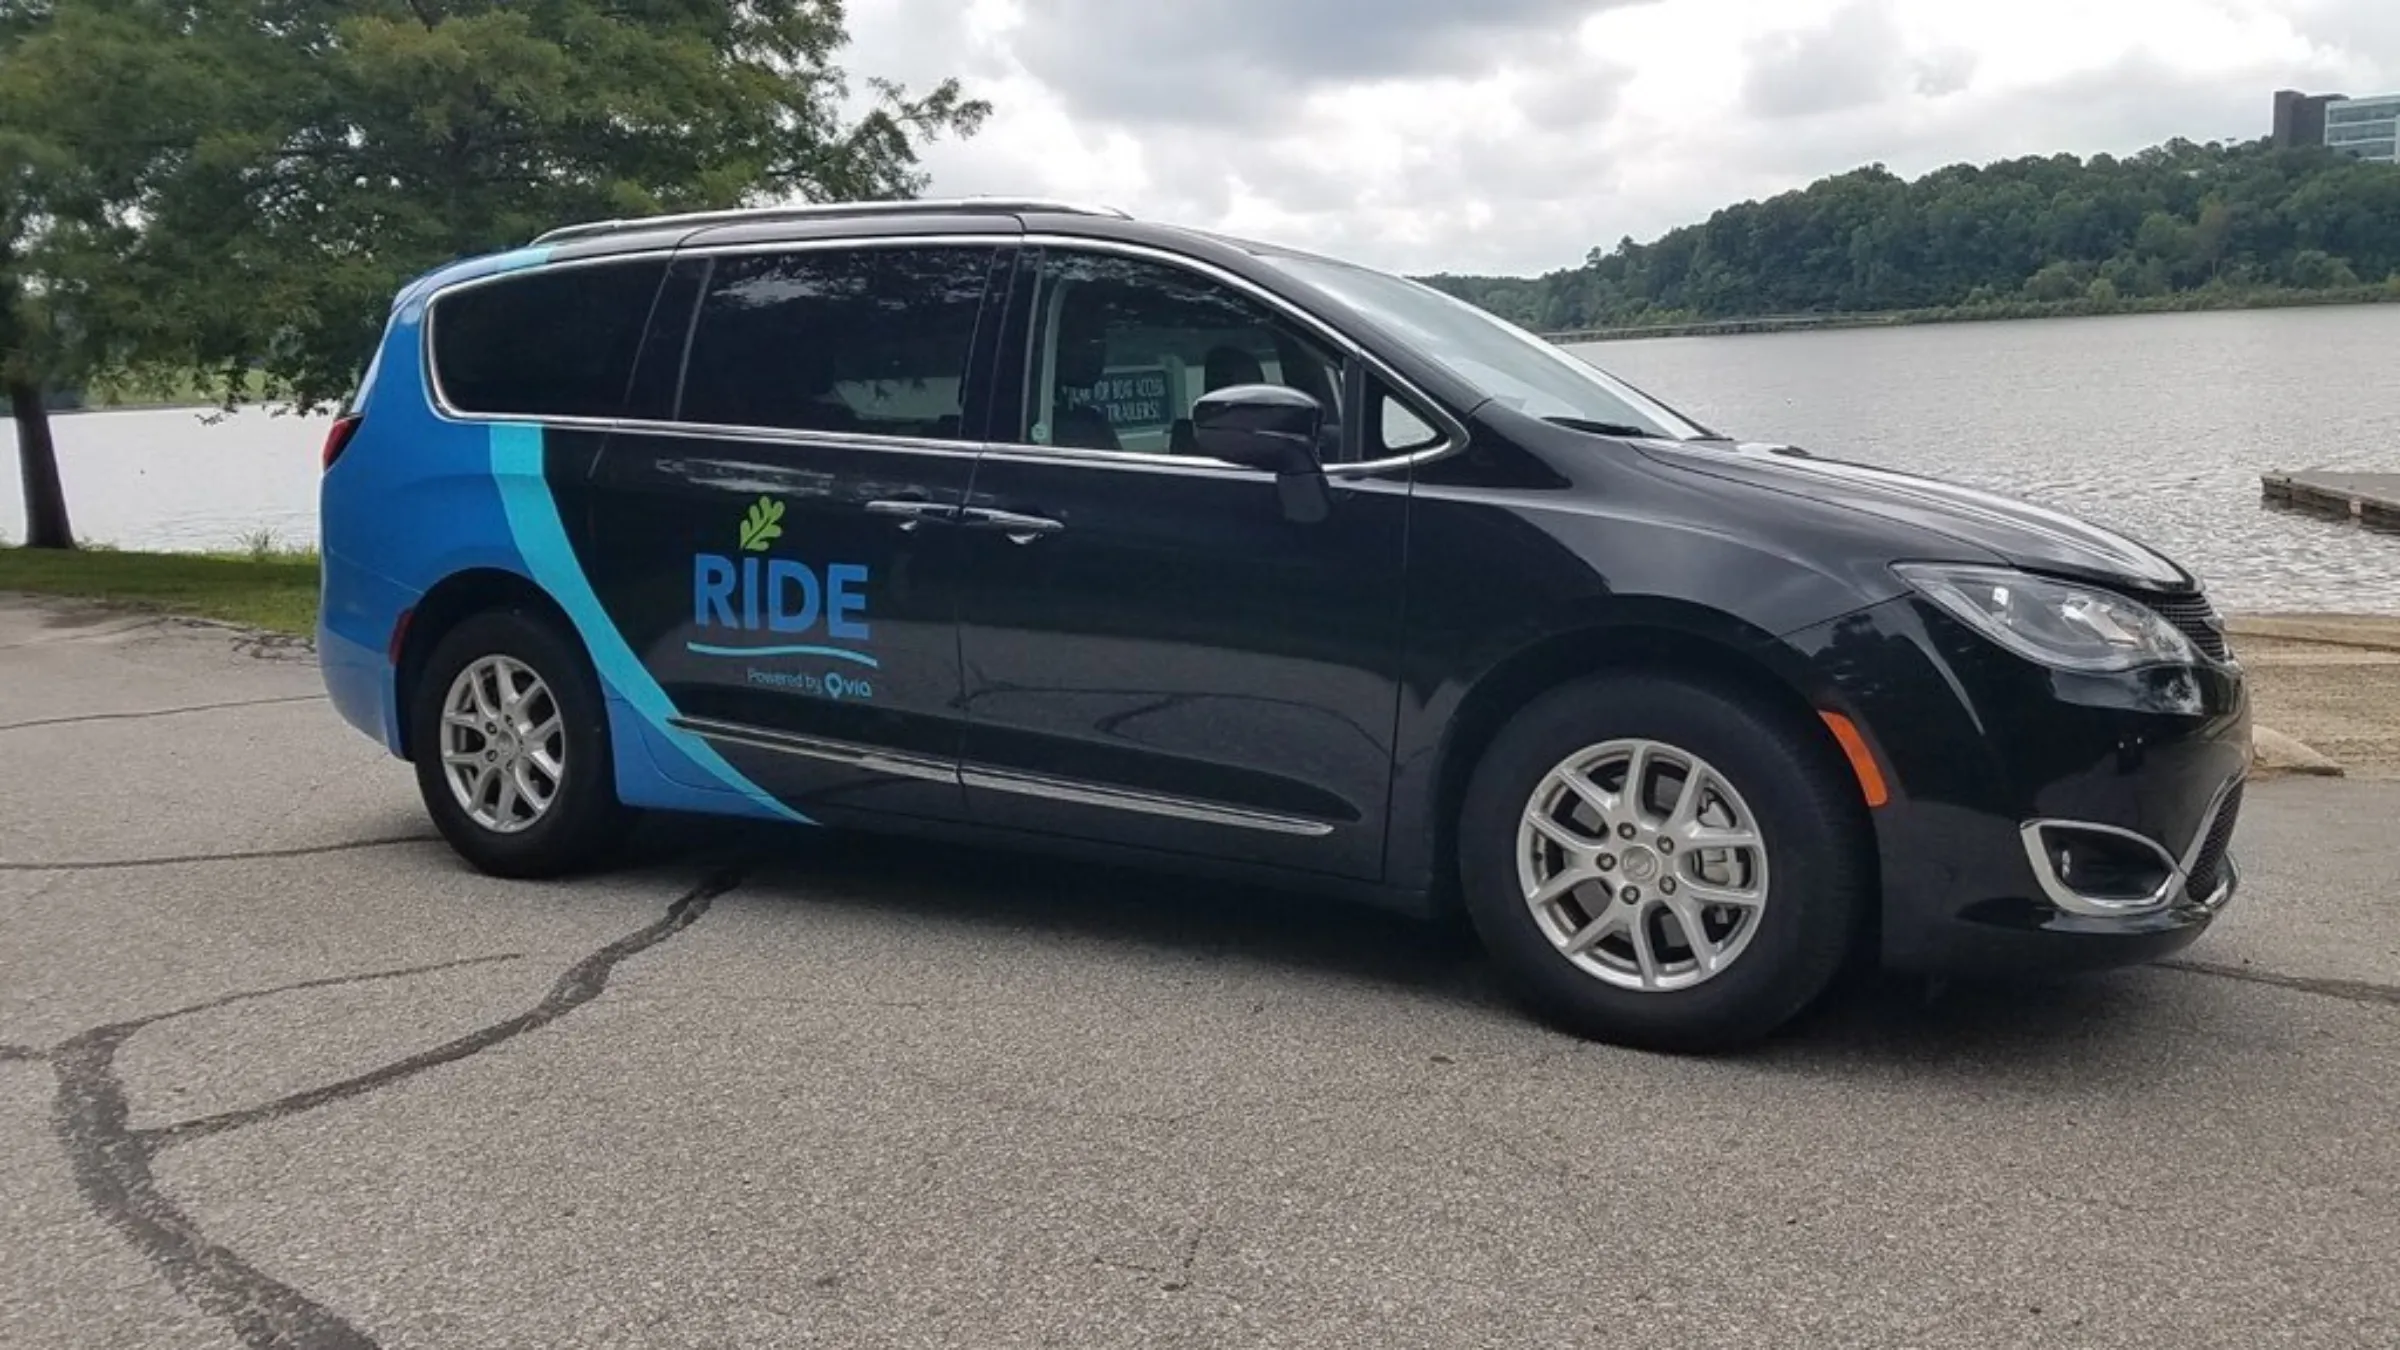 An on-demand transit car is parked in front of a lake